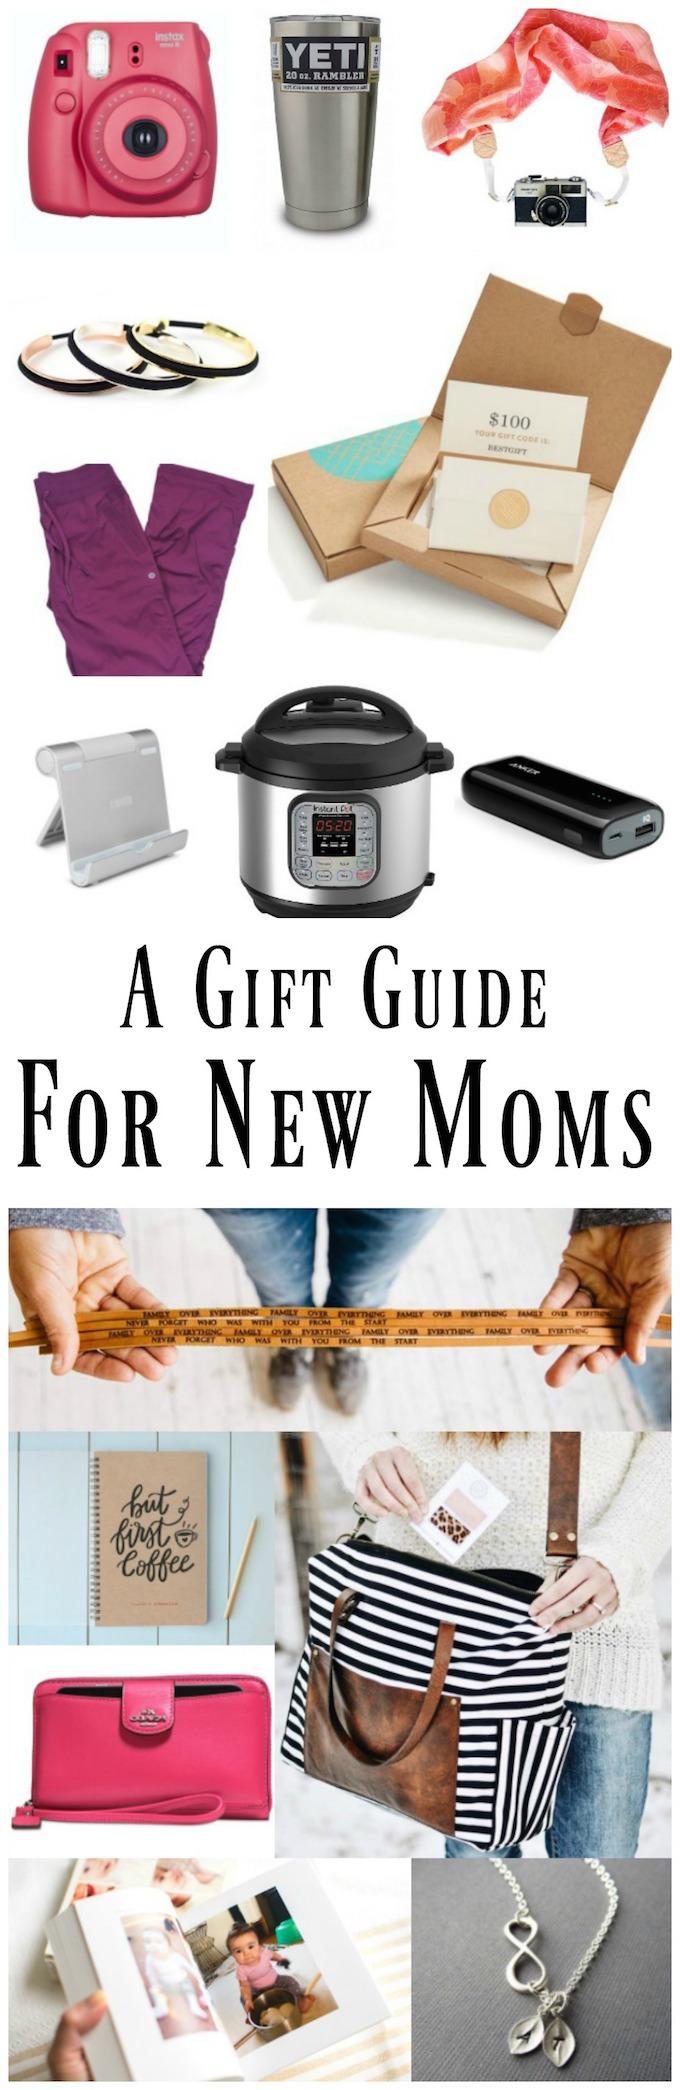 Gifts for Mom- An  Gift Guide »